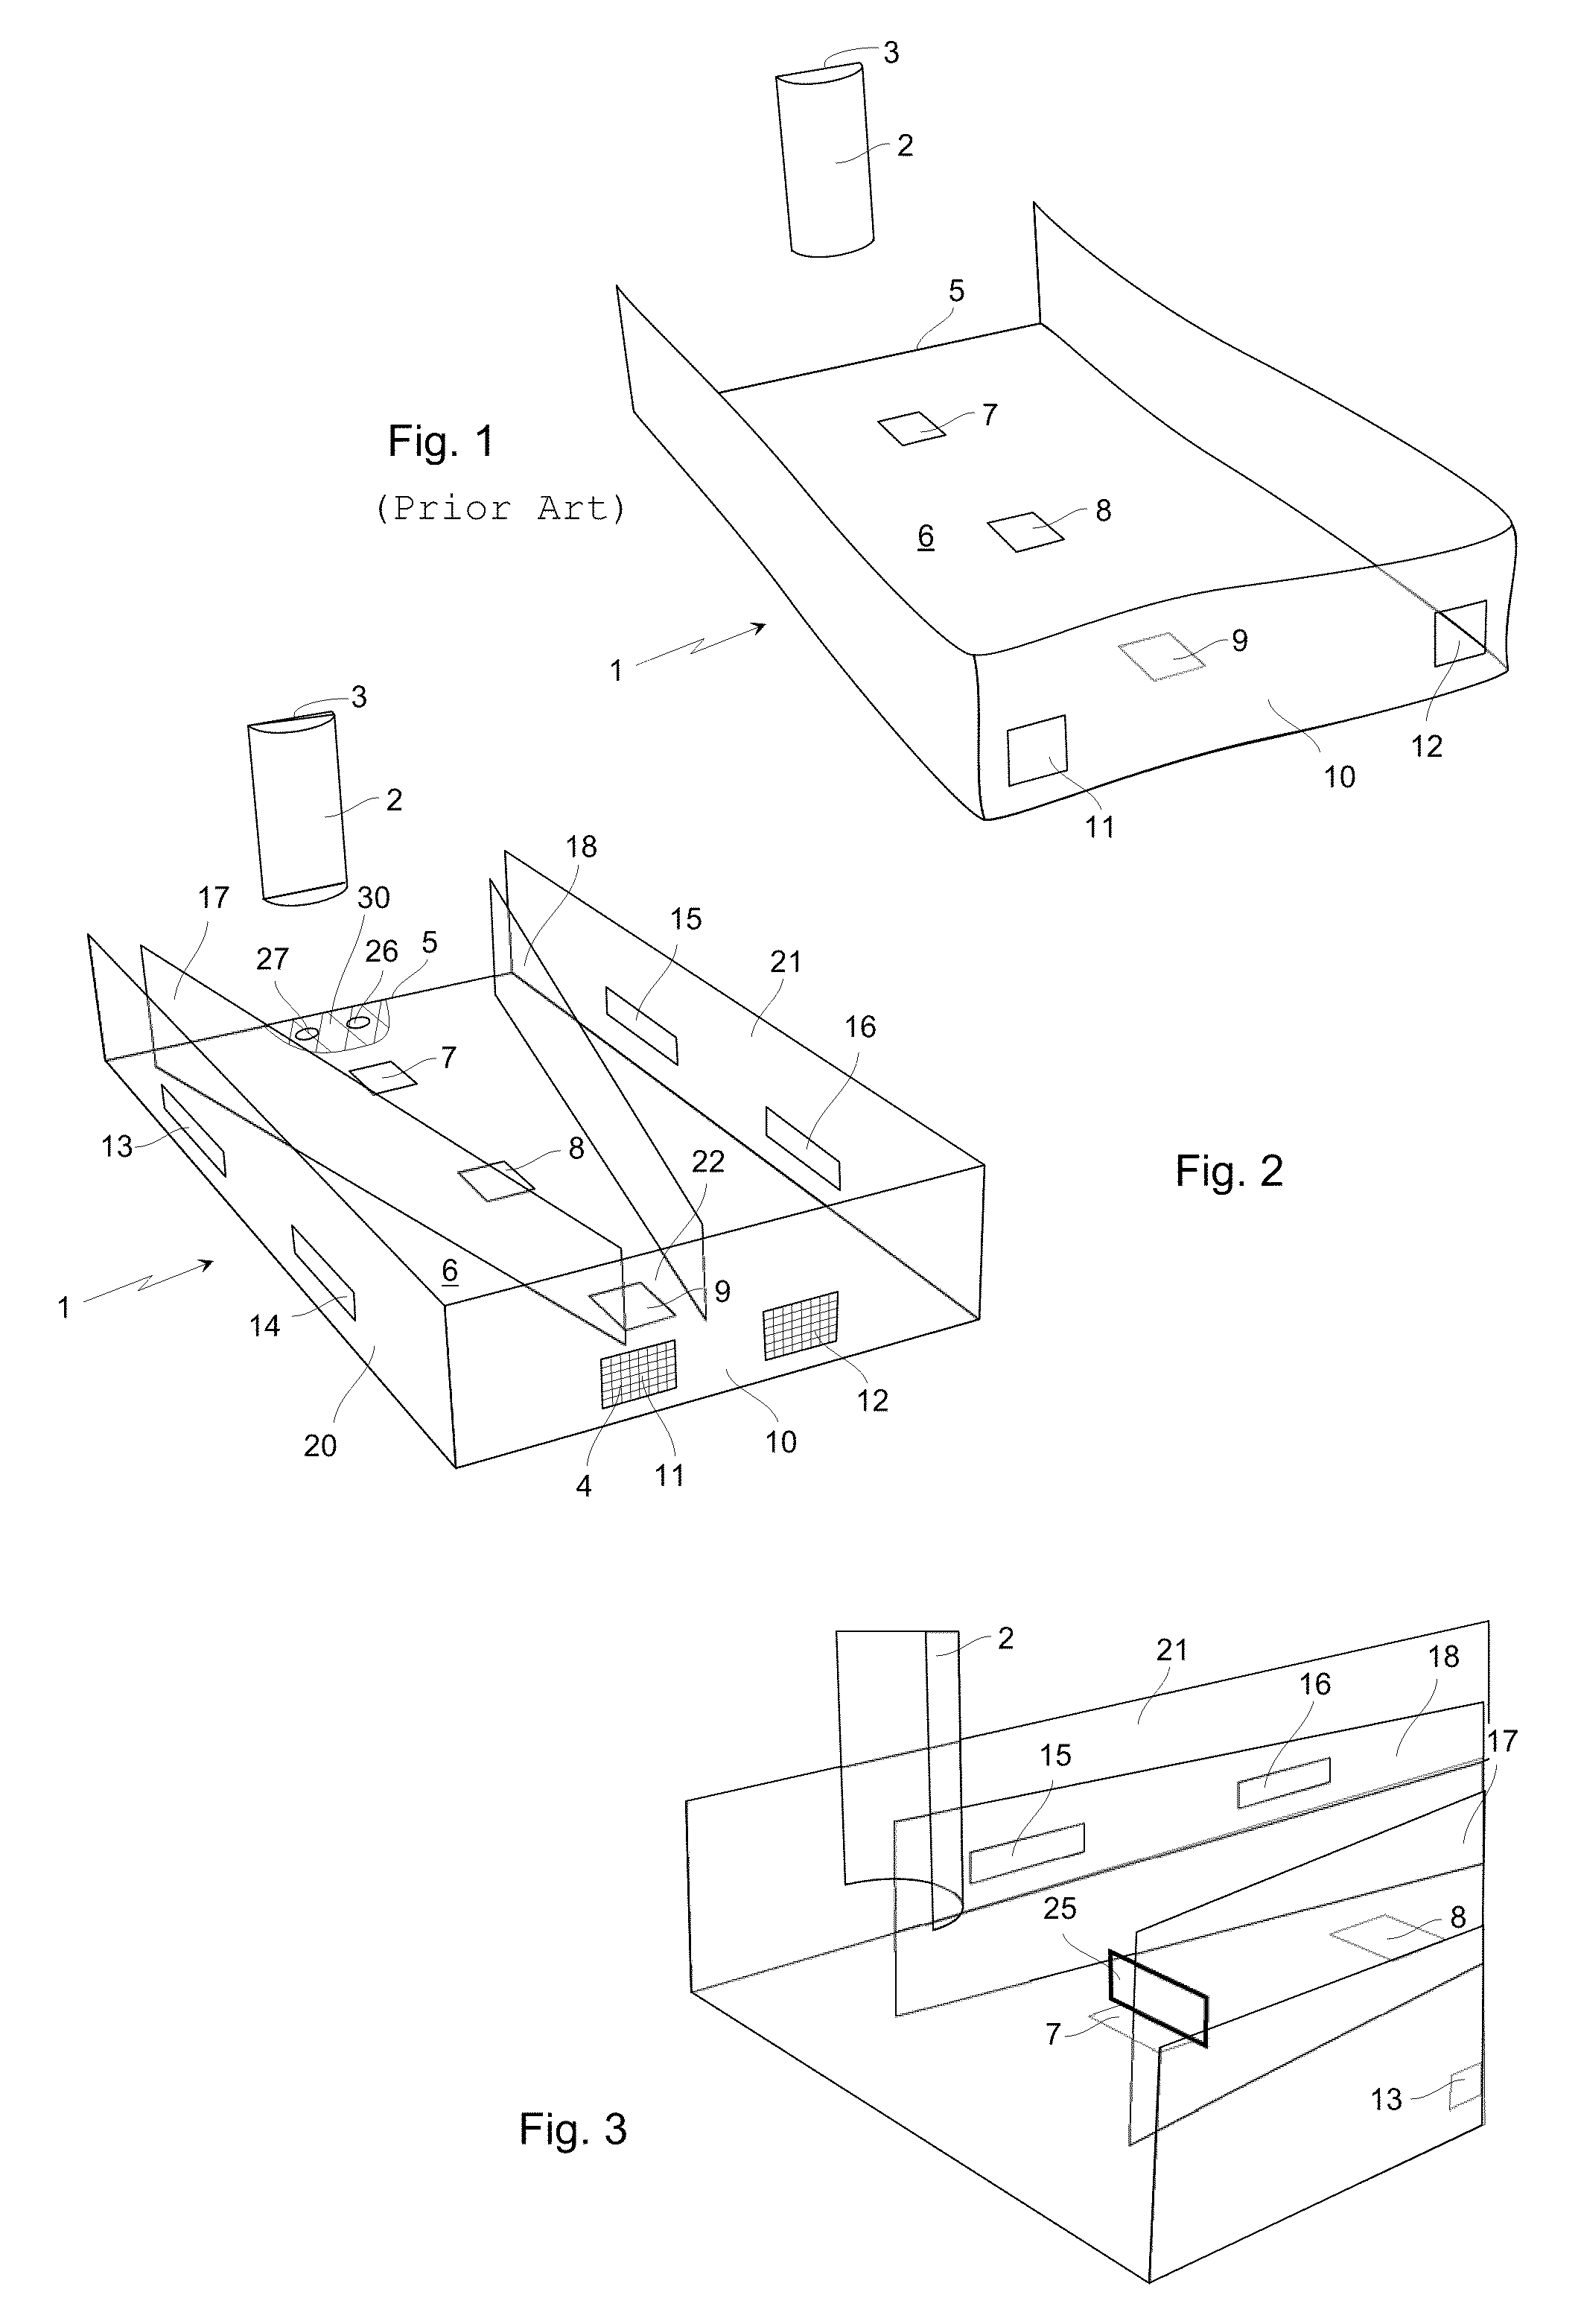 Distributor for use in a method of casting hot metal